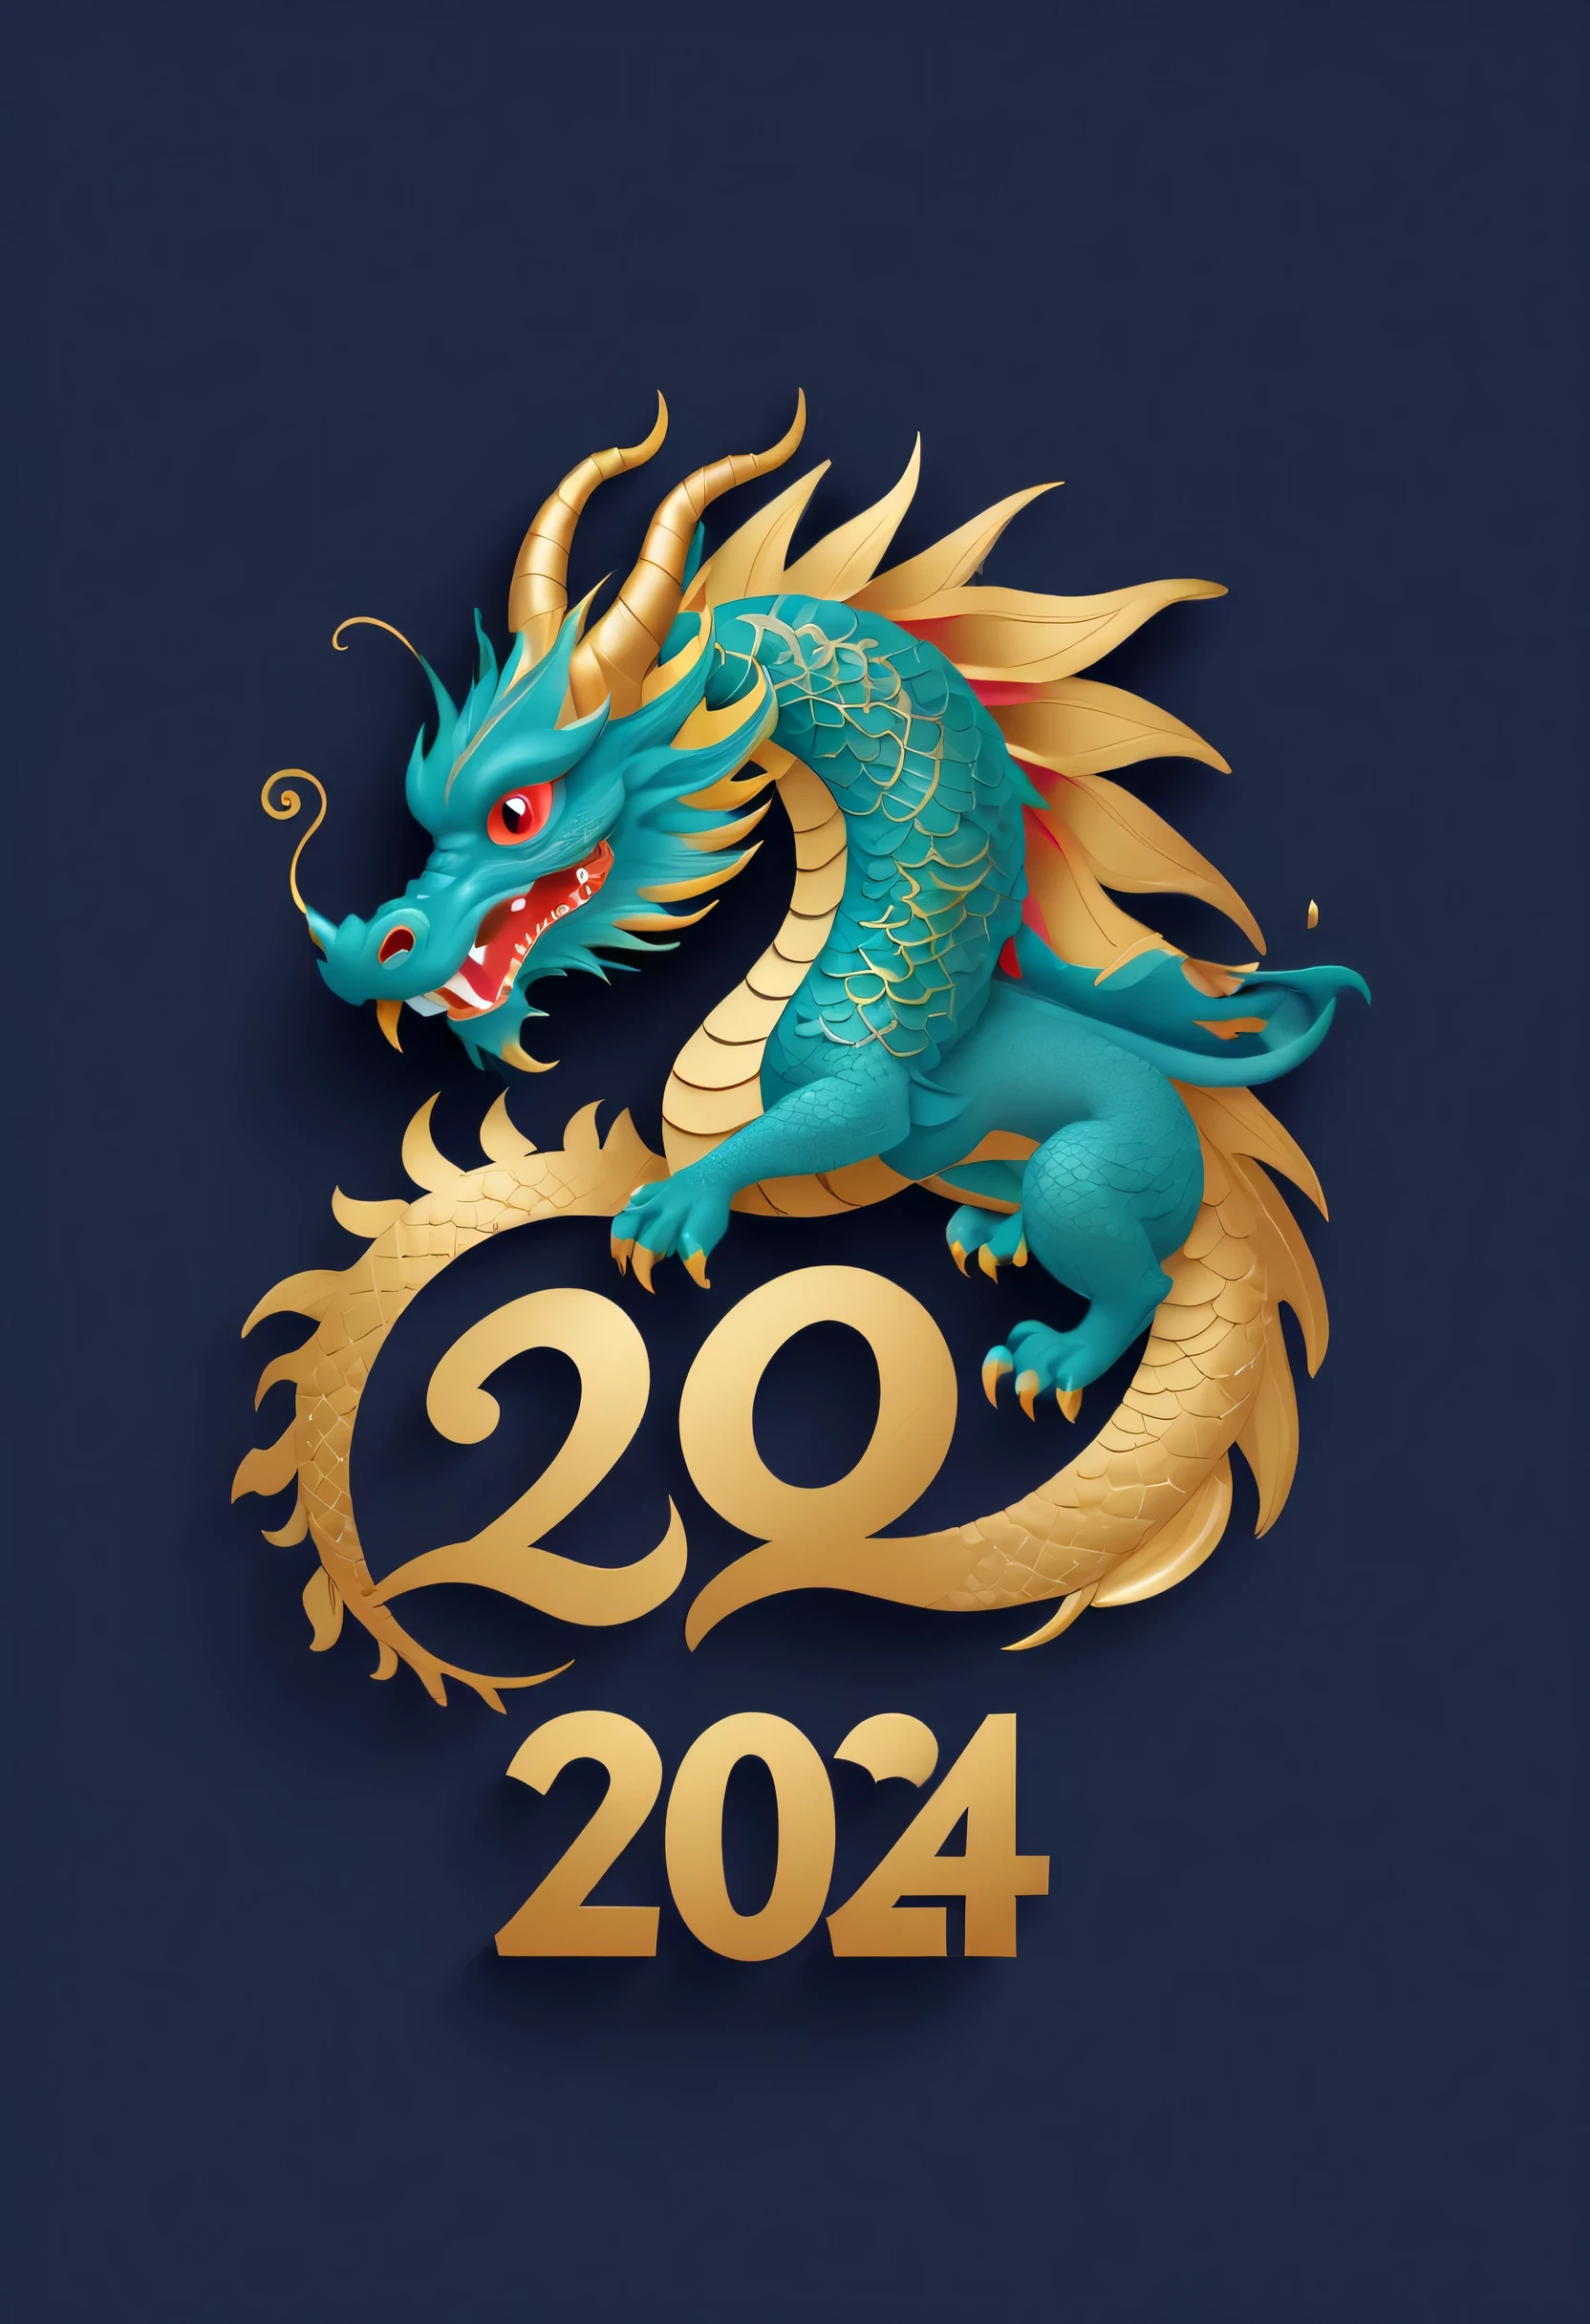 logo "2024", The text is "2024", 创意font设计, font, Chinese dragon, Message card design, Fantastic letters shaped animals, magical creatures, txt says "2024"